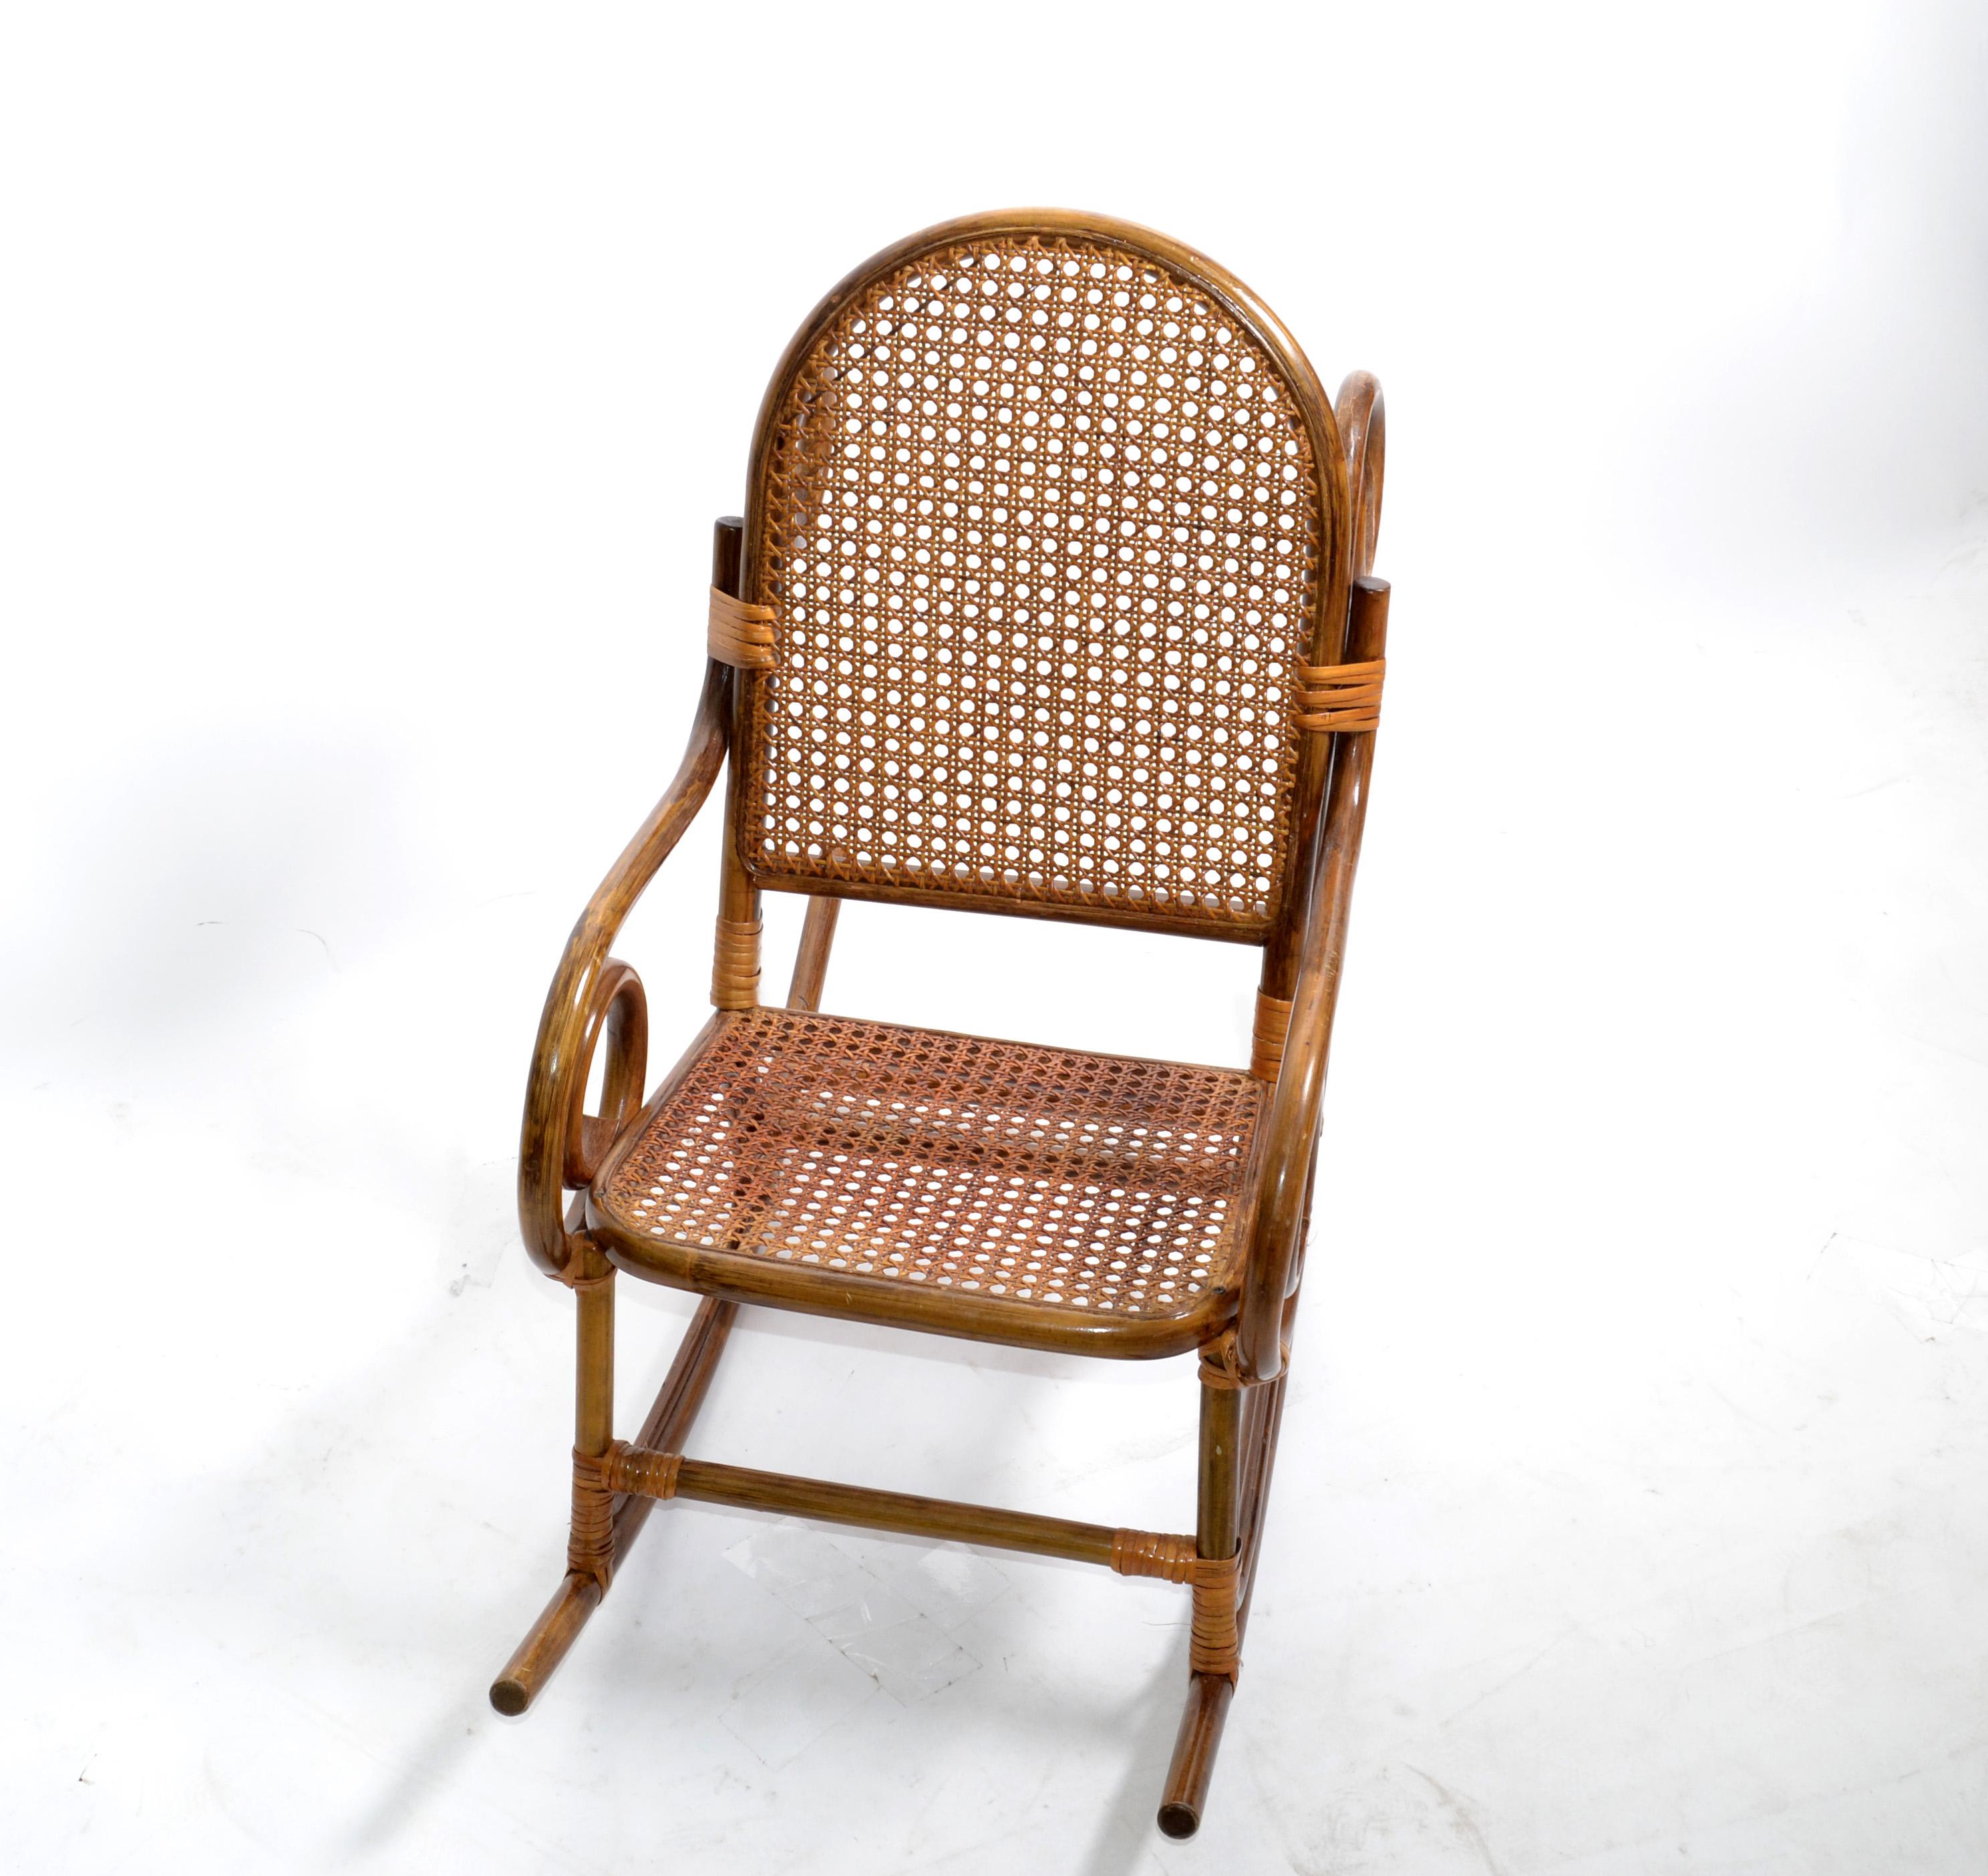 American Mid-Century Modern Bohemian Chic Style Bamboo & Cane Children Rocking Chair 1960 For Sale